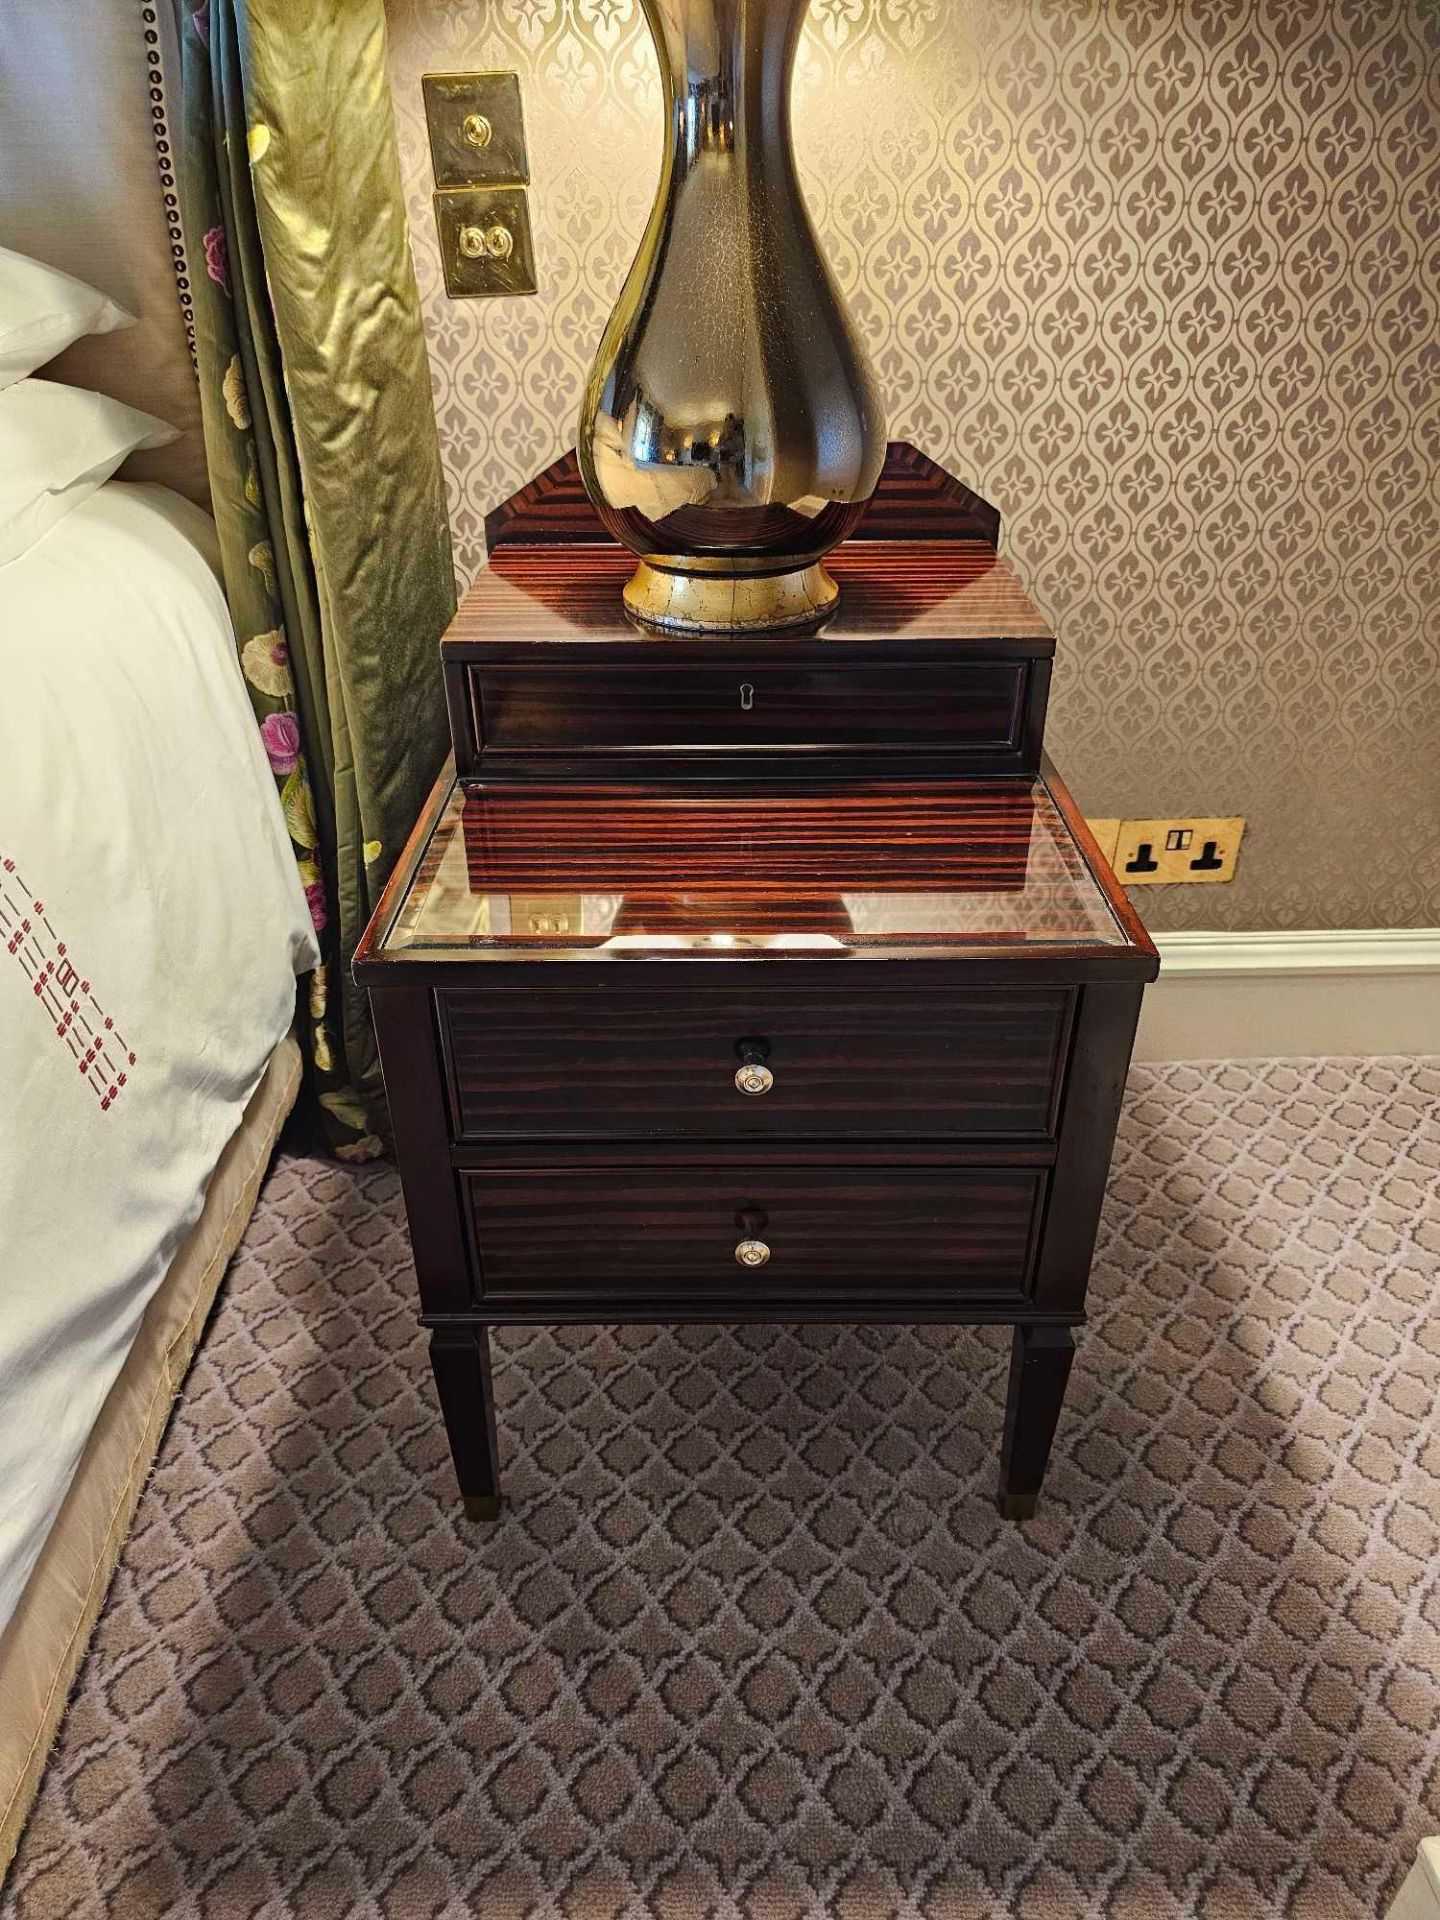 A Pair Of Two Tier Bedside Nightstands With Antiqued Plate Top With Storage Compartments Mounted - Image 3 of 3